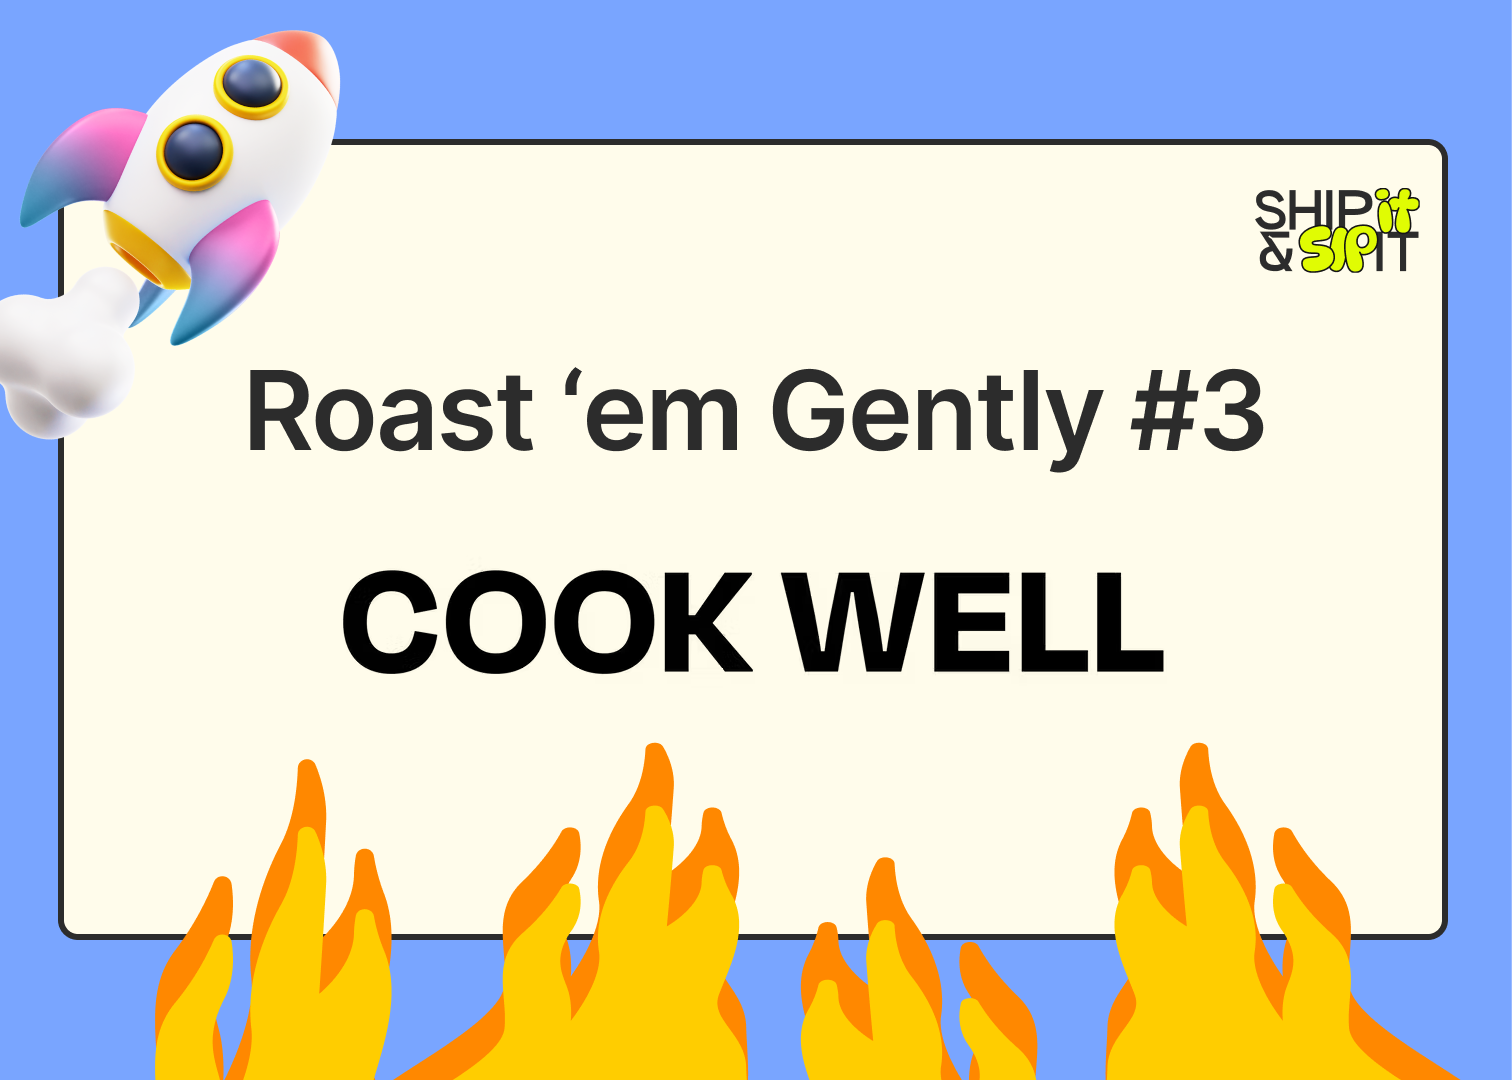 This ex-accountant made the best recipe site on the internet? Cook Well gets Roasted, gently 🥘